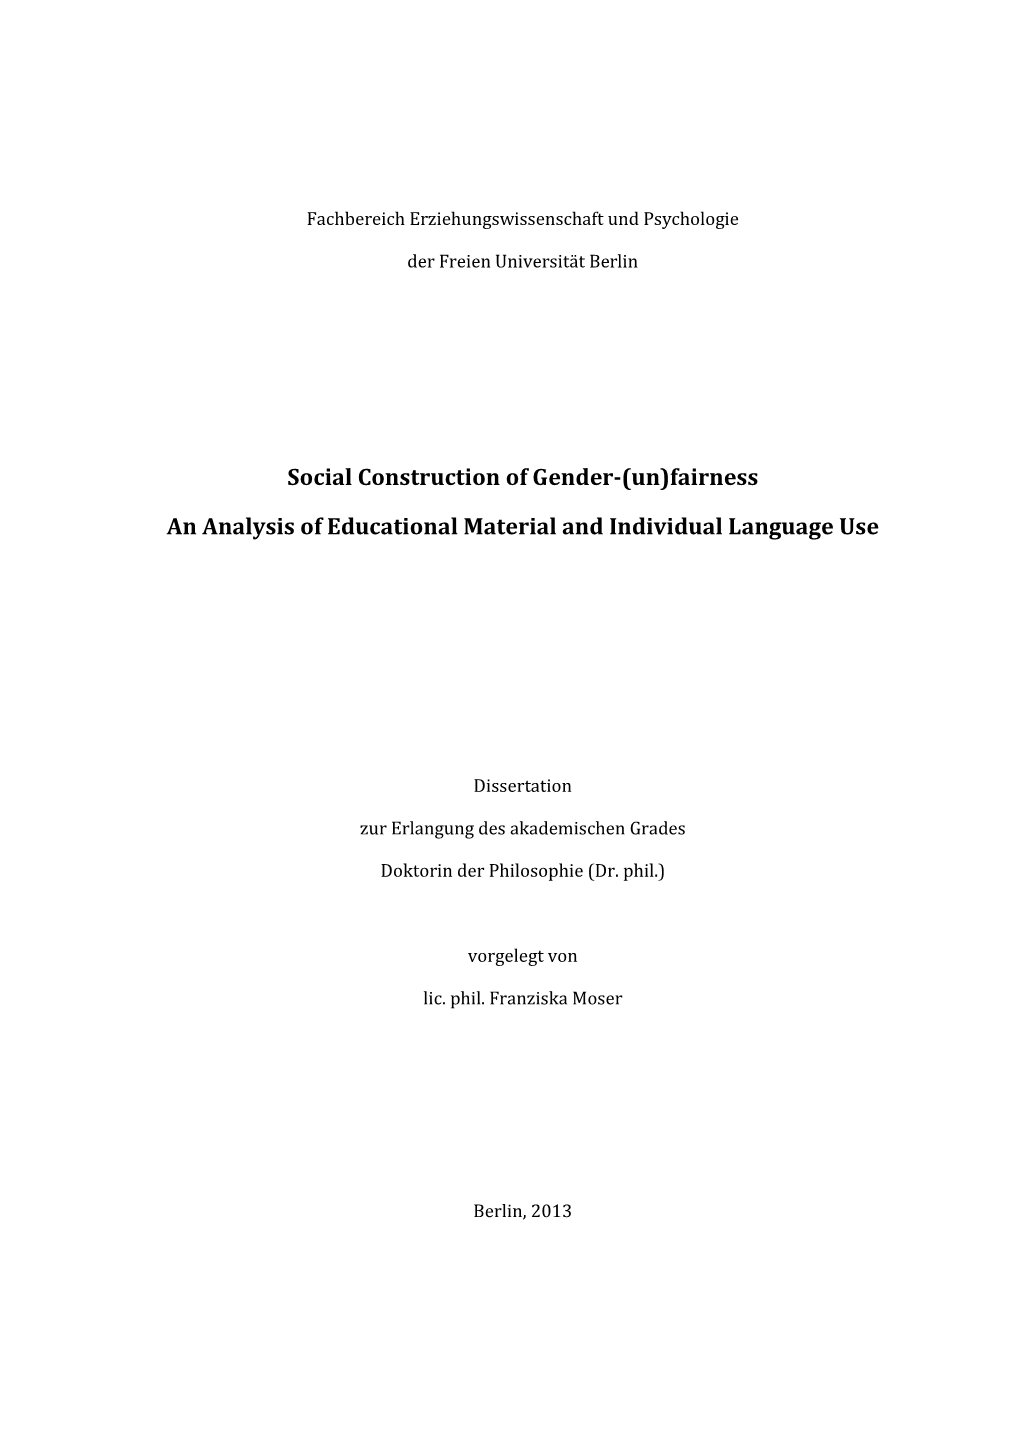 Social Construction of Gender-(Un)Fairness an Analysis of Educational Material and Individual Language